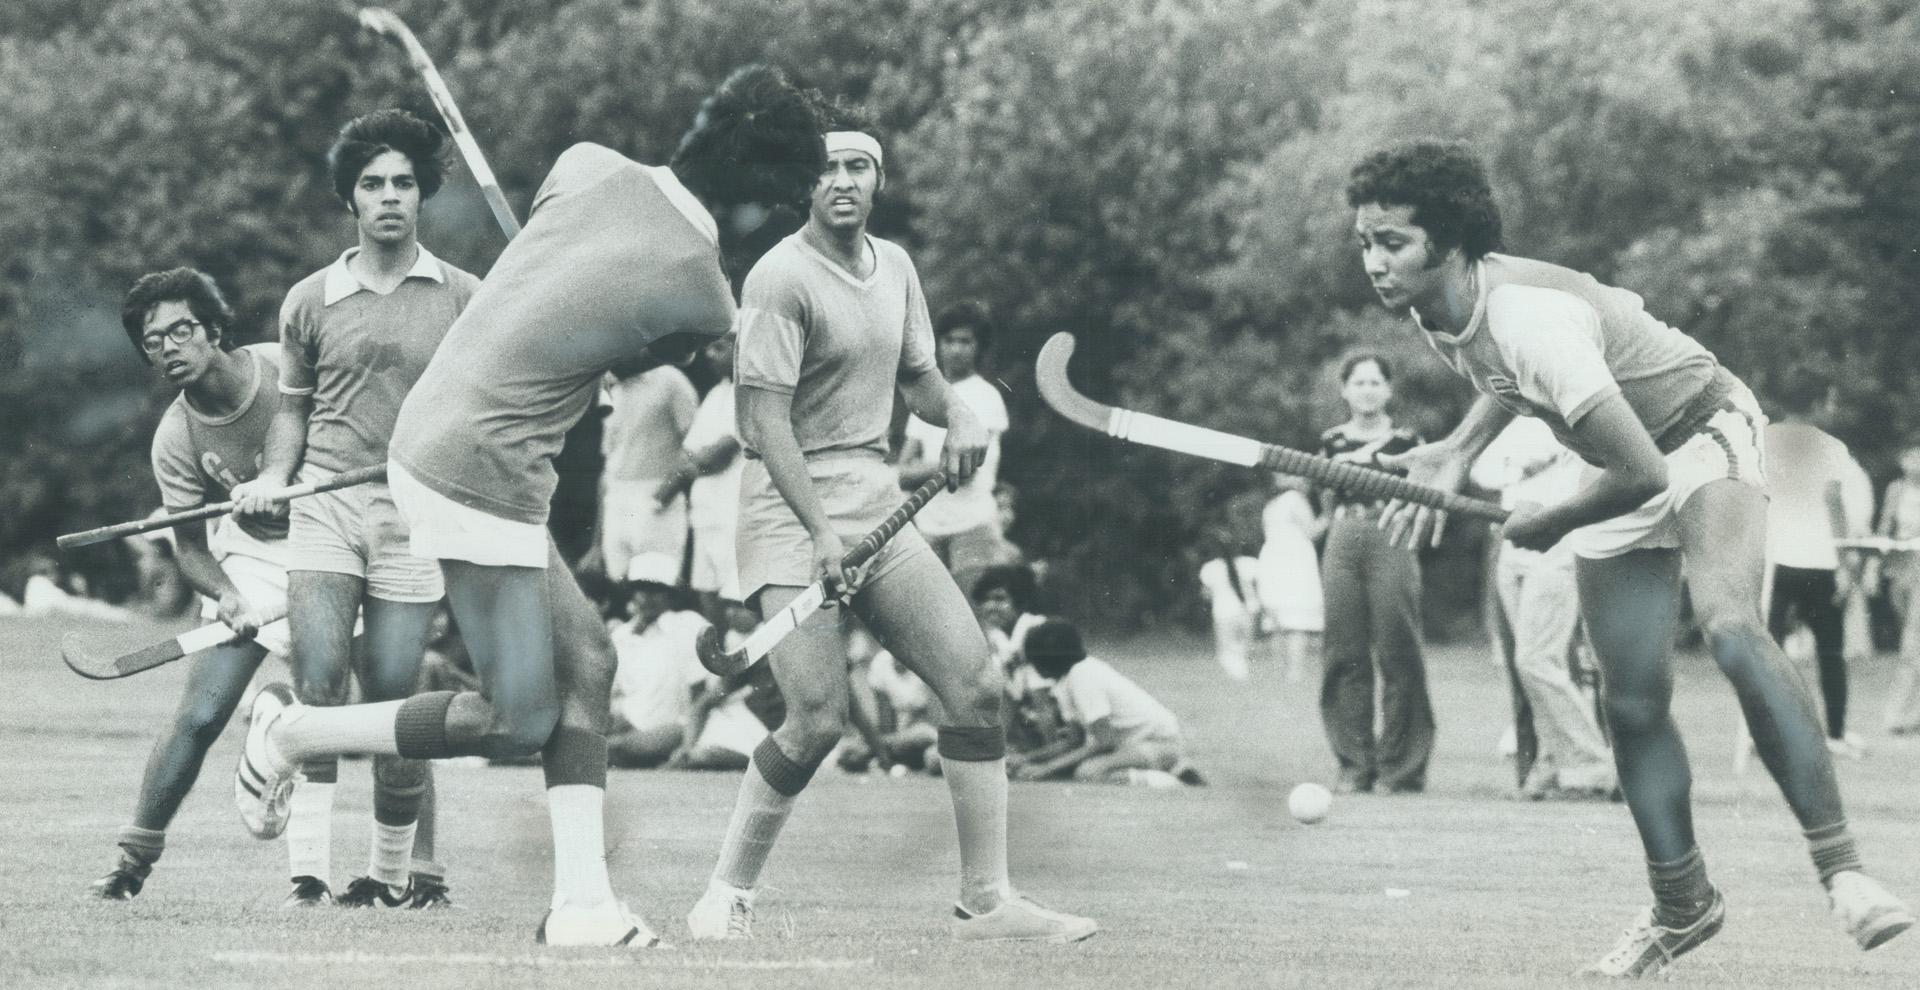 In field Hockey action at Sunnybrook Park, the Goan Overseas Association (in white shorts) battles the Falcons, in one of the many amateur leagues tha(...)